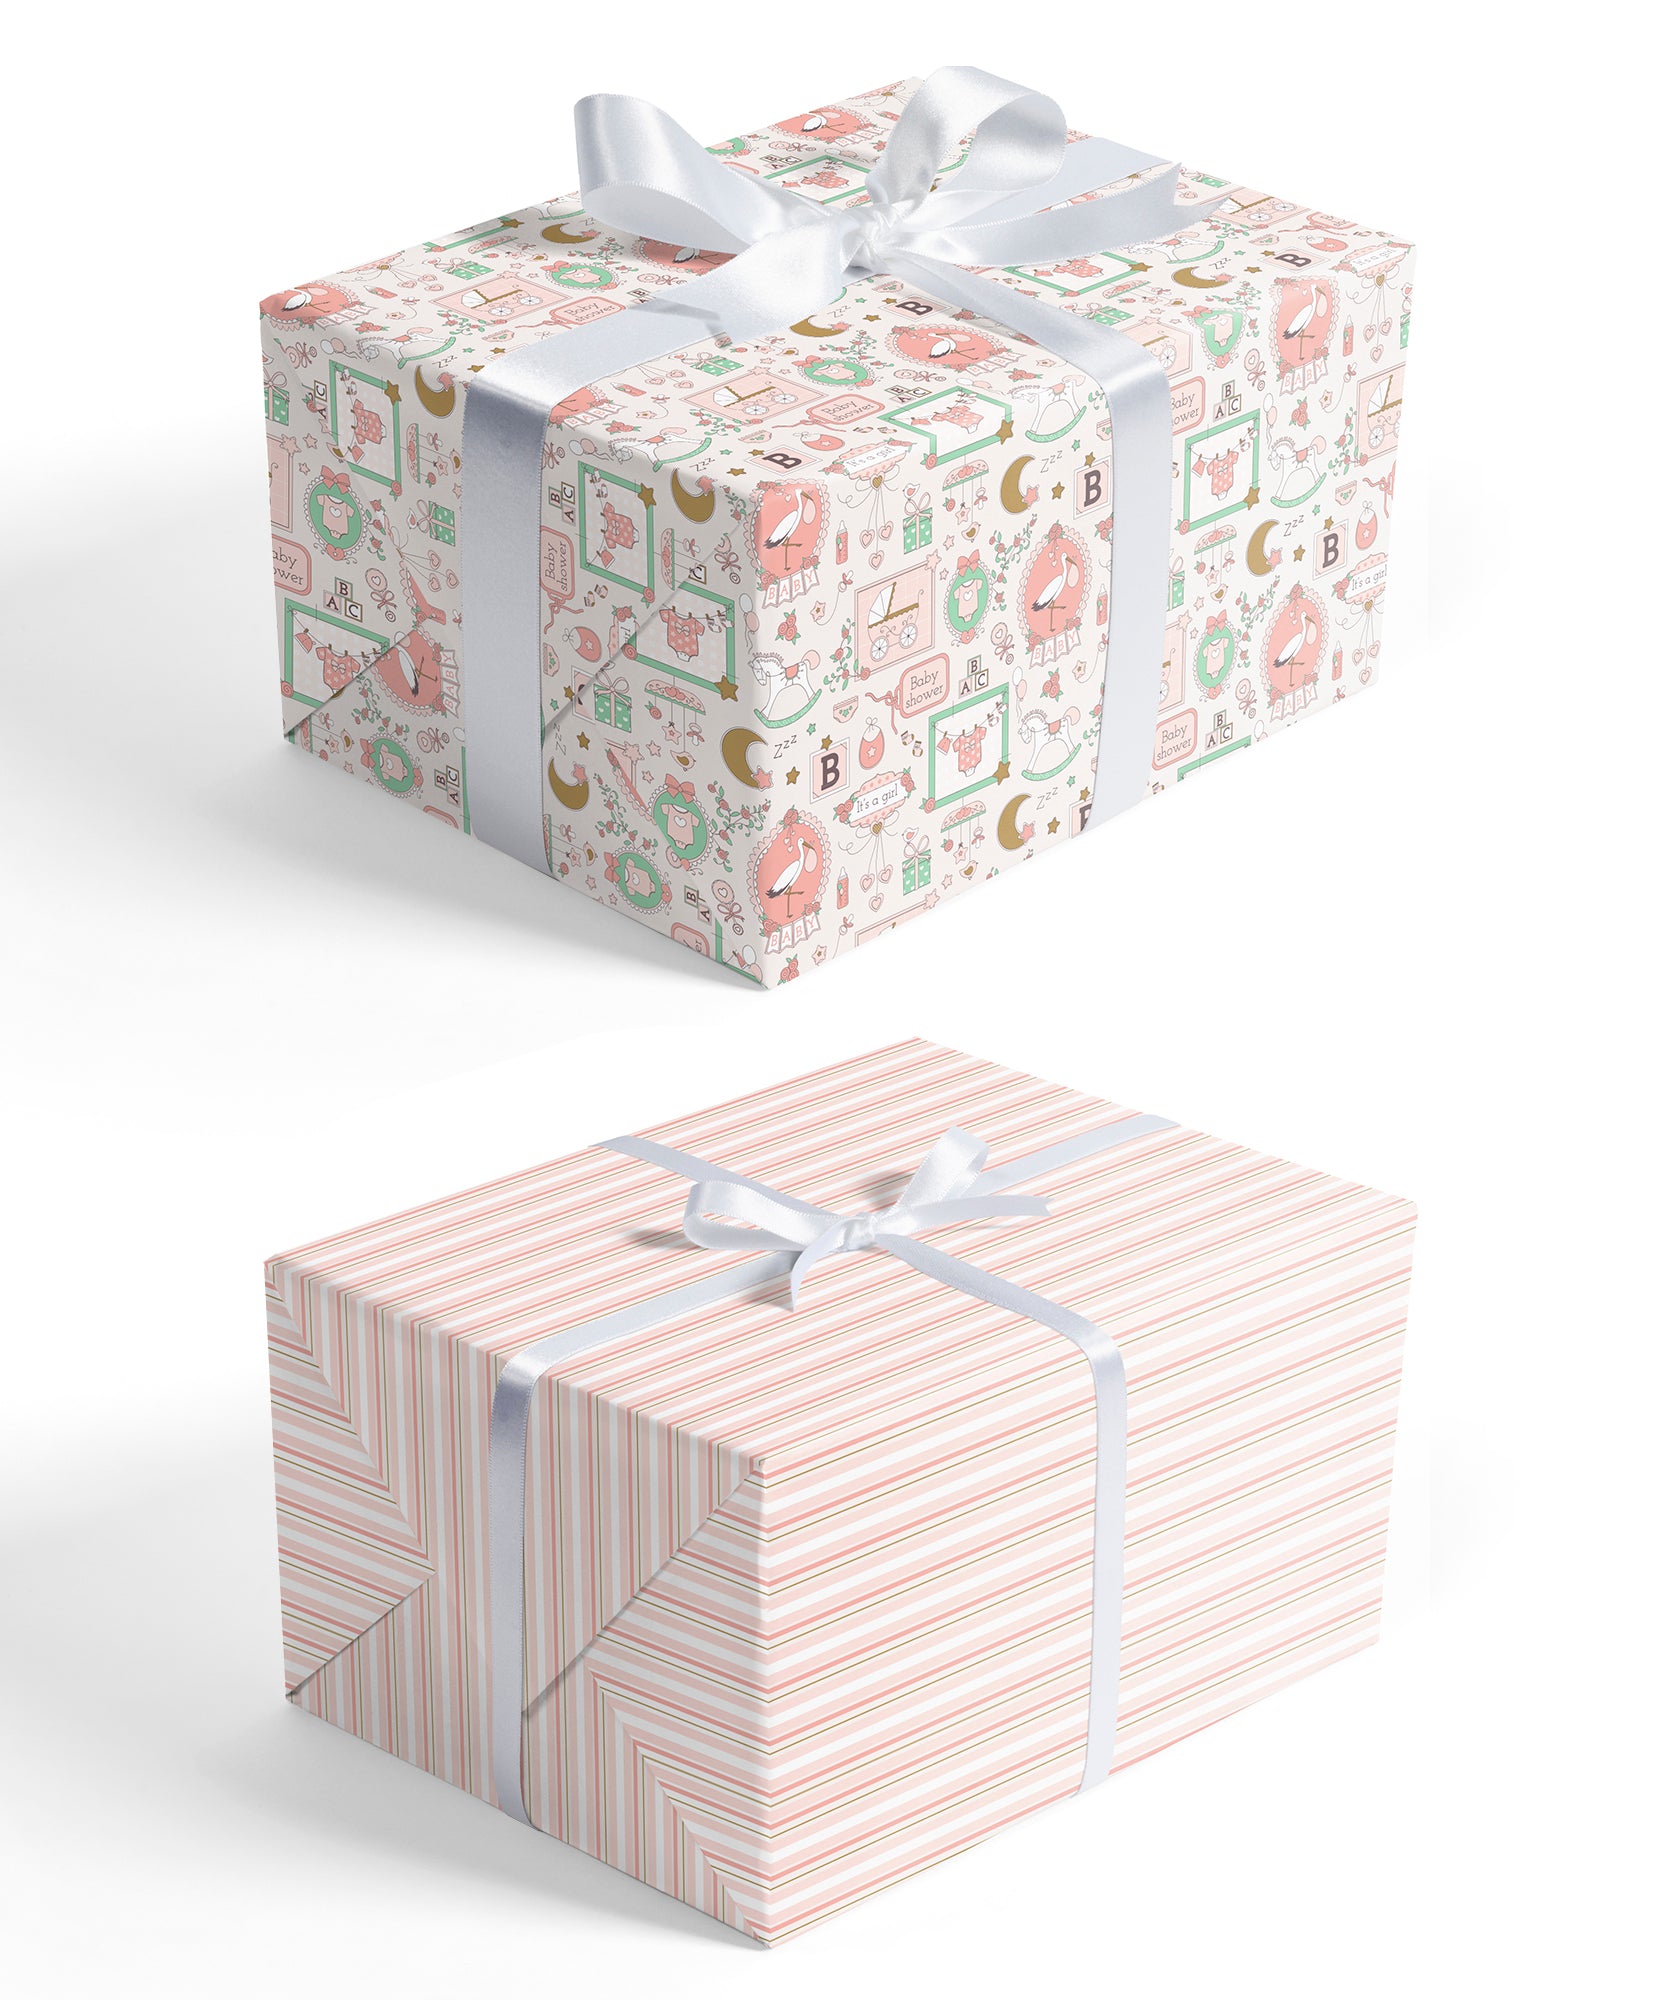 Baby Shower Girl Pink Wrapping Paper with Cross Stripe Jumbo Roll Wholesale Wrapaholic